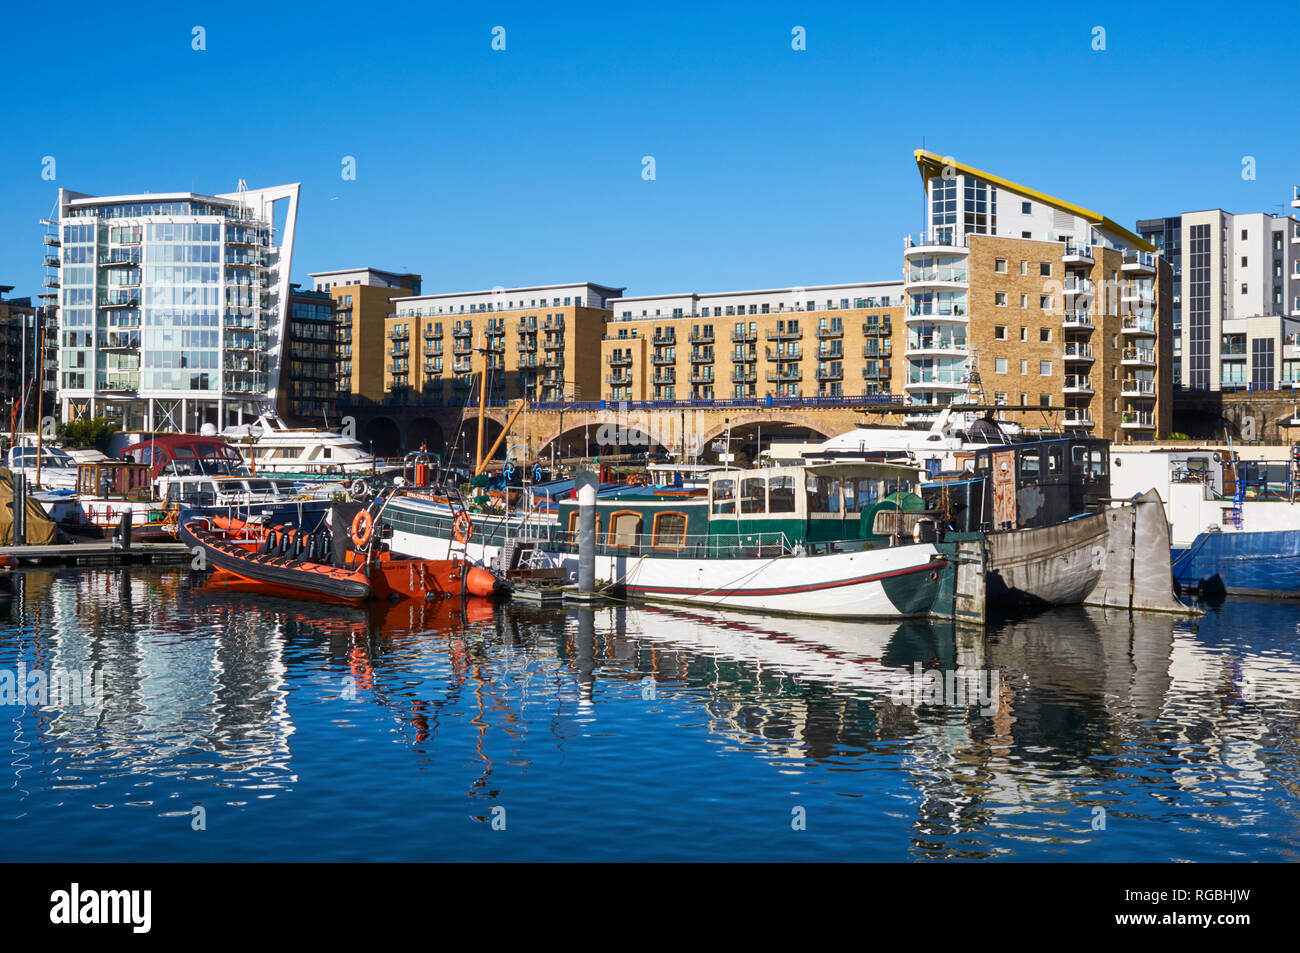 Yachts and narrowboats in Limehouse Basin, East London UK, with new apartments, on a bight sunny day Stock Photo